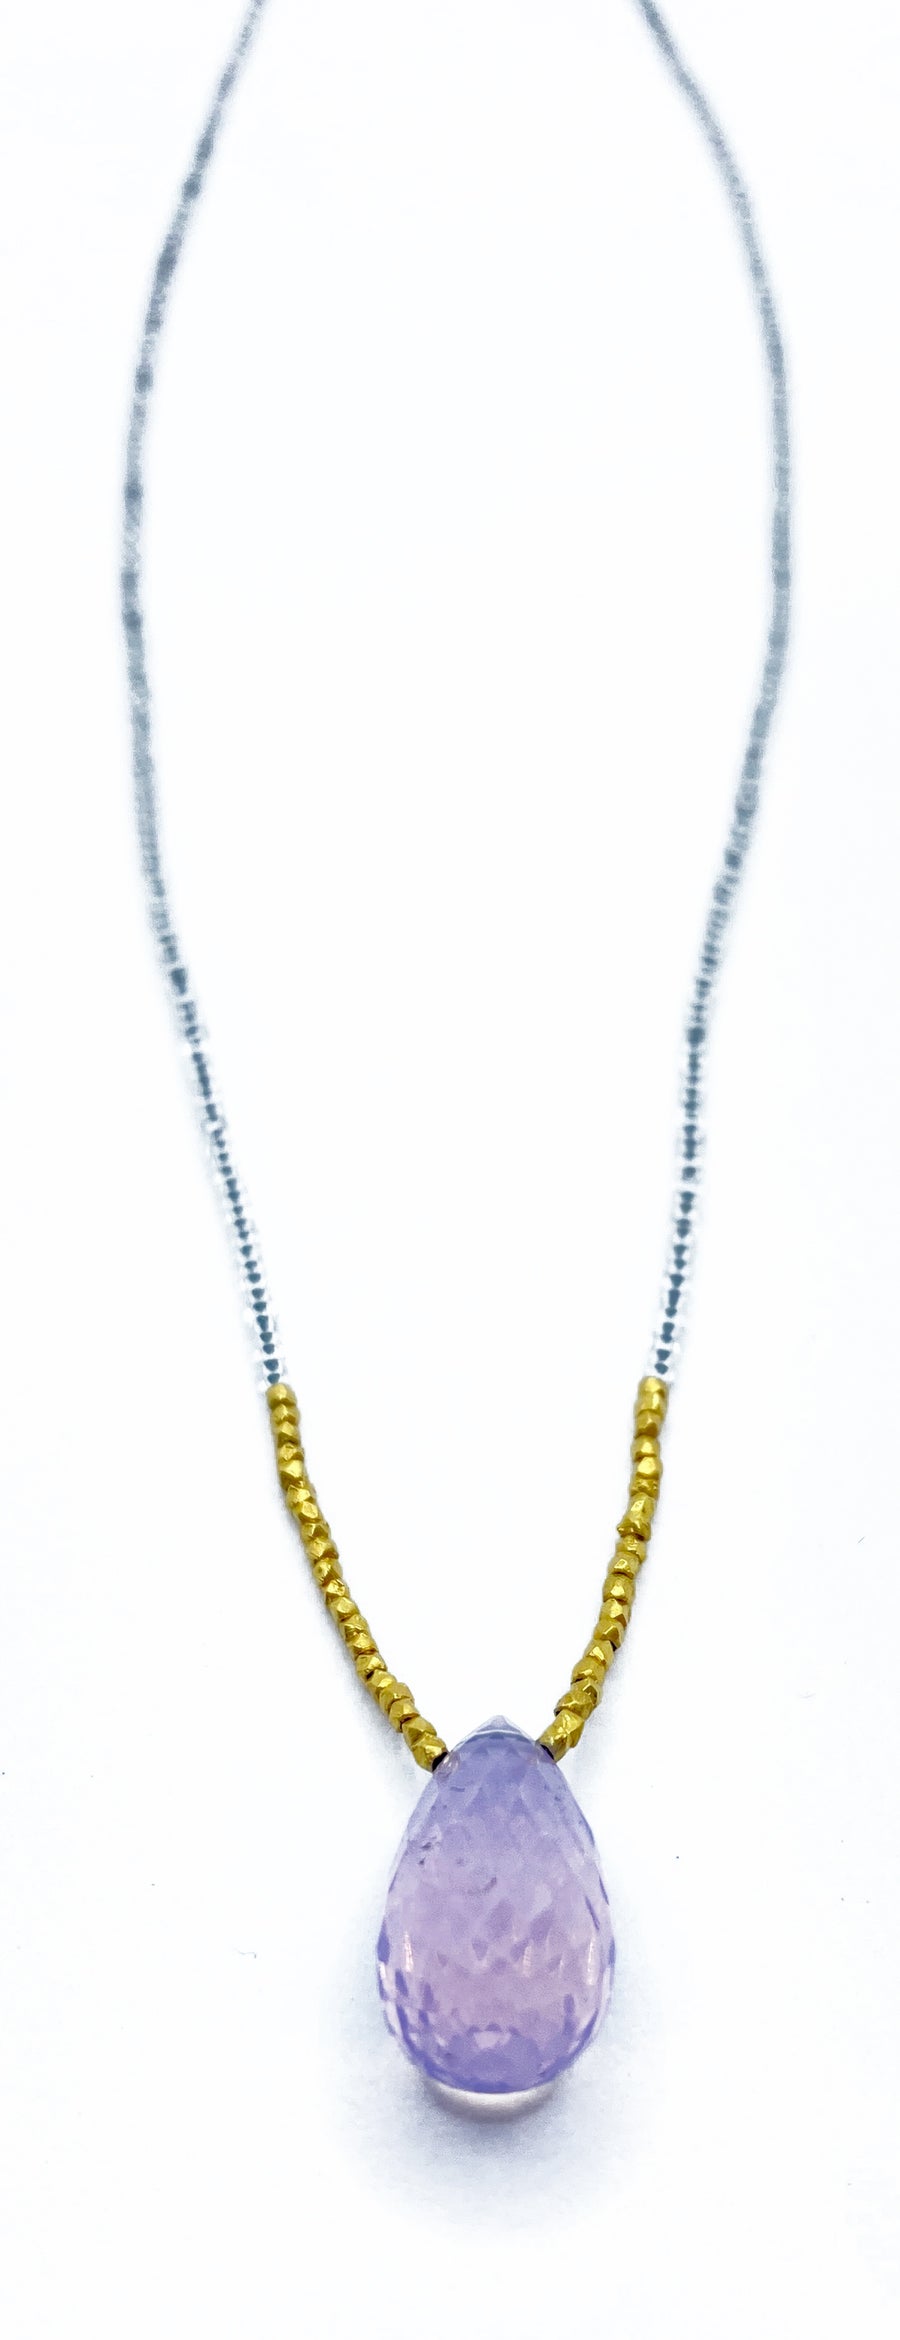 Debbie Fisher | Clear Seed Bead, Gold Vermeil & Scoralite Bead Necklace